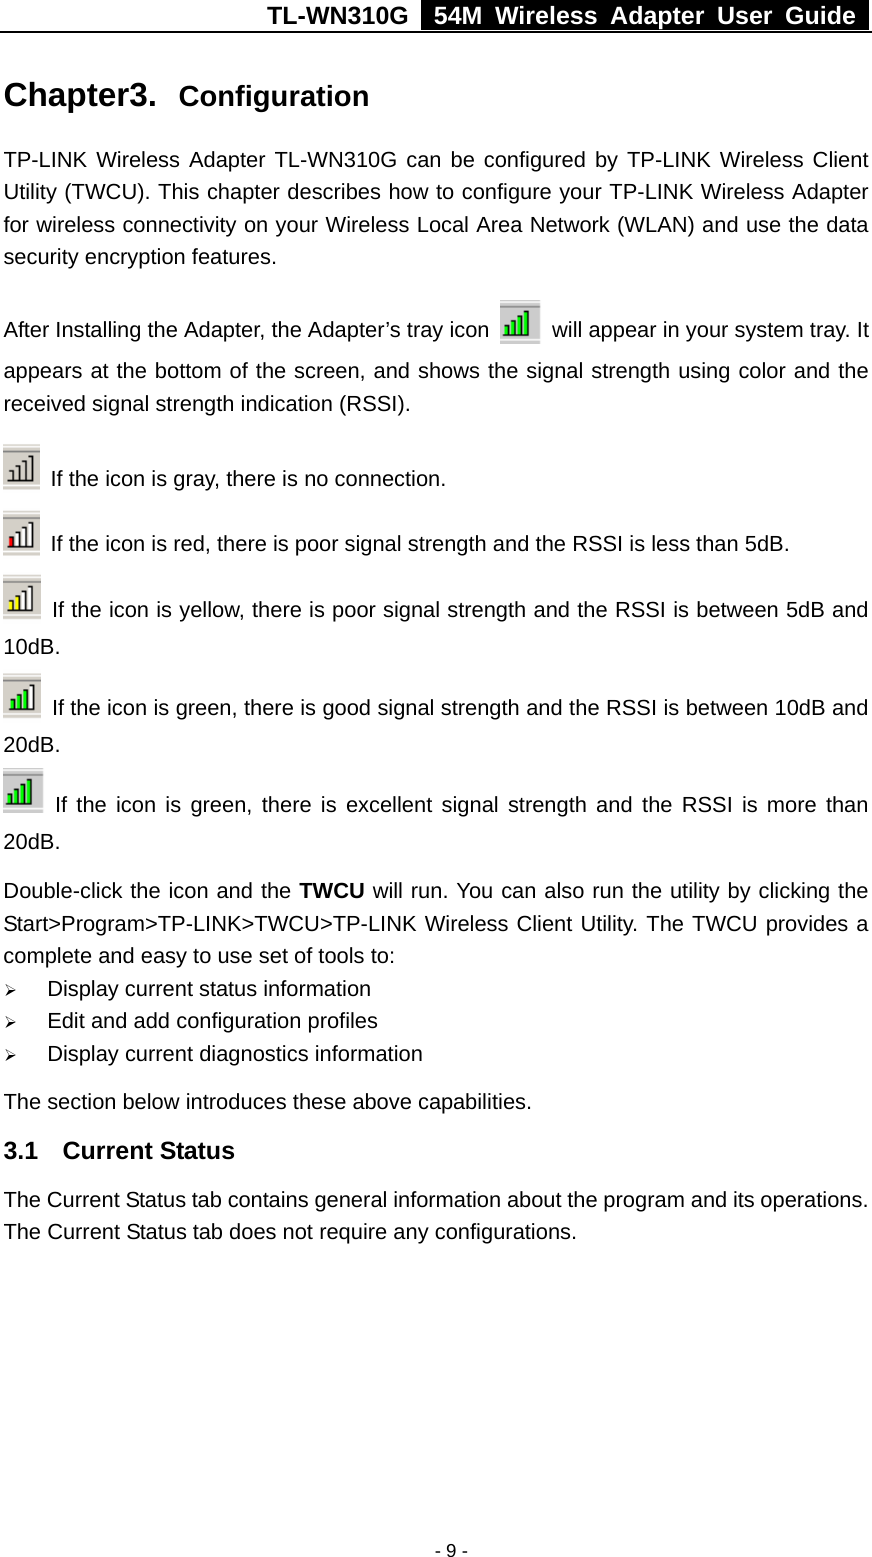 TL-WN310G   54M Wireless Adapter User Guide   - 9 -Chapter3.  Configuration TP-LINK Wireless Adapter TL-WN310G can be configured by TP-LINK Wireless Client Utility (TWCU). This chapter describes how to configure your TP-LINK Wireless Adapter for wireless connectivity on your Wireless Local Area Network (WLAN) and use the data security encryption features. After Installing the Adapter, the Adapter’s tray icon    will appear in your system tray. It appears at the bottom of the screen, and shows the signal strength using color and the received signal strength indication (RSSI).  If the icon is gray, there is no connection.   If the icon is red, there is poor signal strength and the RSSI is less than 5dB.   If the icon is yellow, there is poor signal strength and the RSSI is between 5dB and 10dB.   If the icon is green, there is good signal strength and the RSSI is between 10dB and 20dB.  If the icon is green, there is excellent signal strength and the RSSI is more than 20dB. Double-click the icon and the TWCU will run. You can also run the utility by clicking the Start&gt;Program&gt;TP-LINK&gt;TWCU&gt;TP-LINK Wireless Client Utility. The TWCU provides a complete and easy to use set of tools to: ¾ Display current status information ¾ Edit and add configuration profiles ¾ Display current diagnostics information The section below introduces these above capabilities. 3.1 Current Status The Current Status tab contains general information about the program and its operations. The Current Status tab does not require any configurations. 